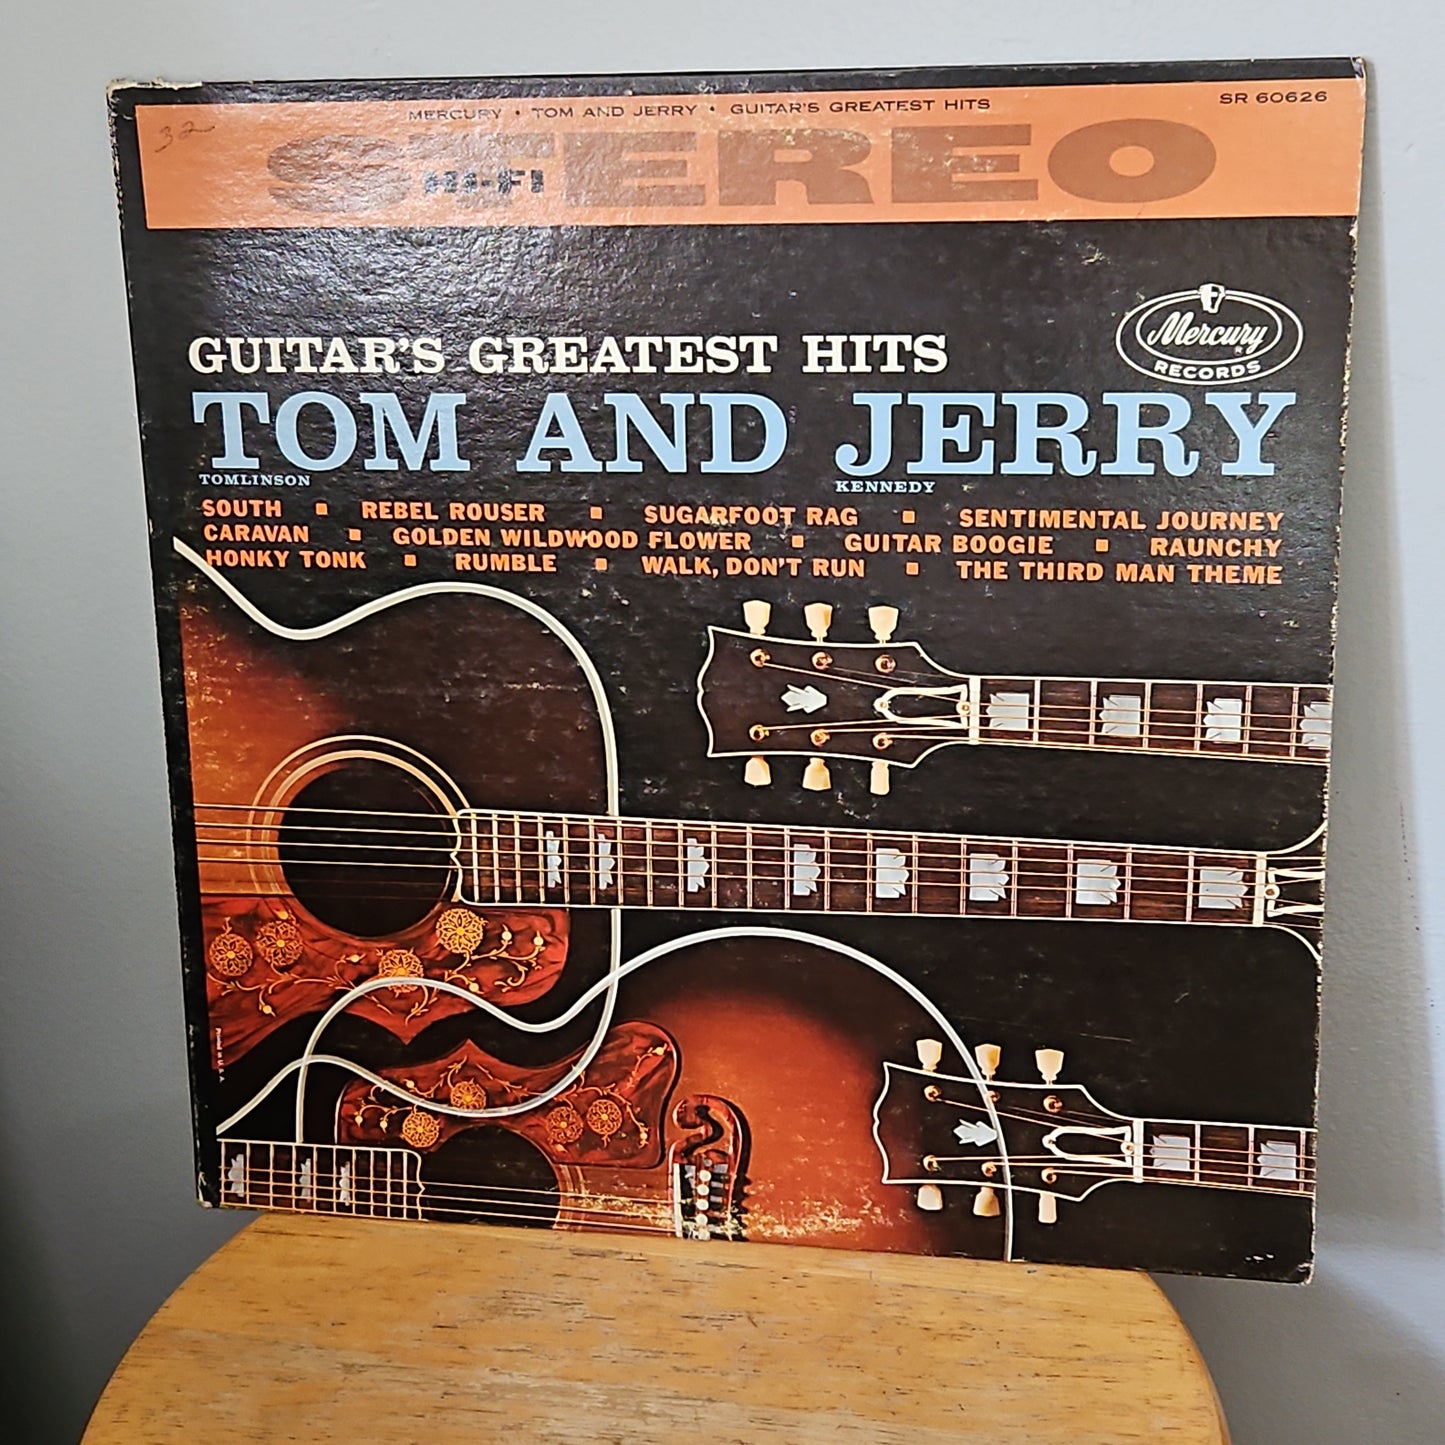 Tom Tomlinson and Jerry Kennedy Guitar's Greatest Hits By Mercury Records